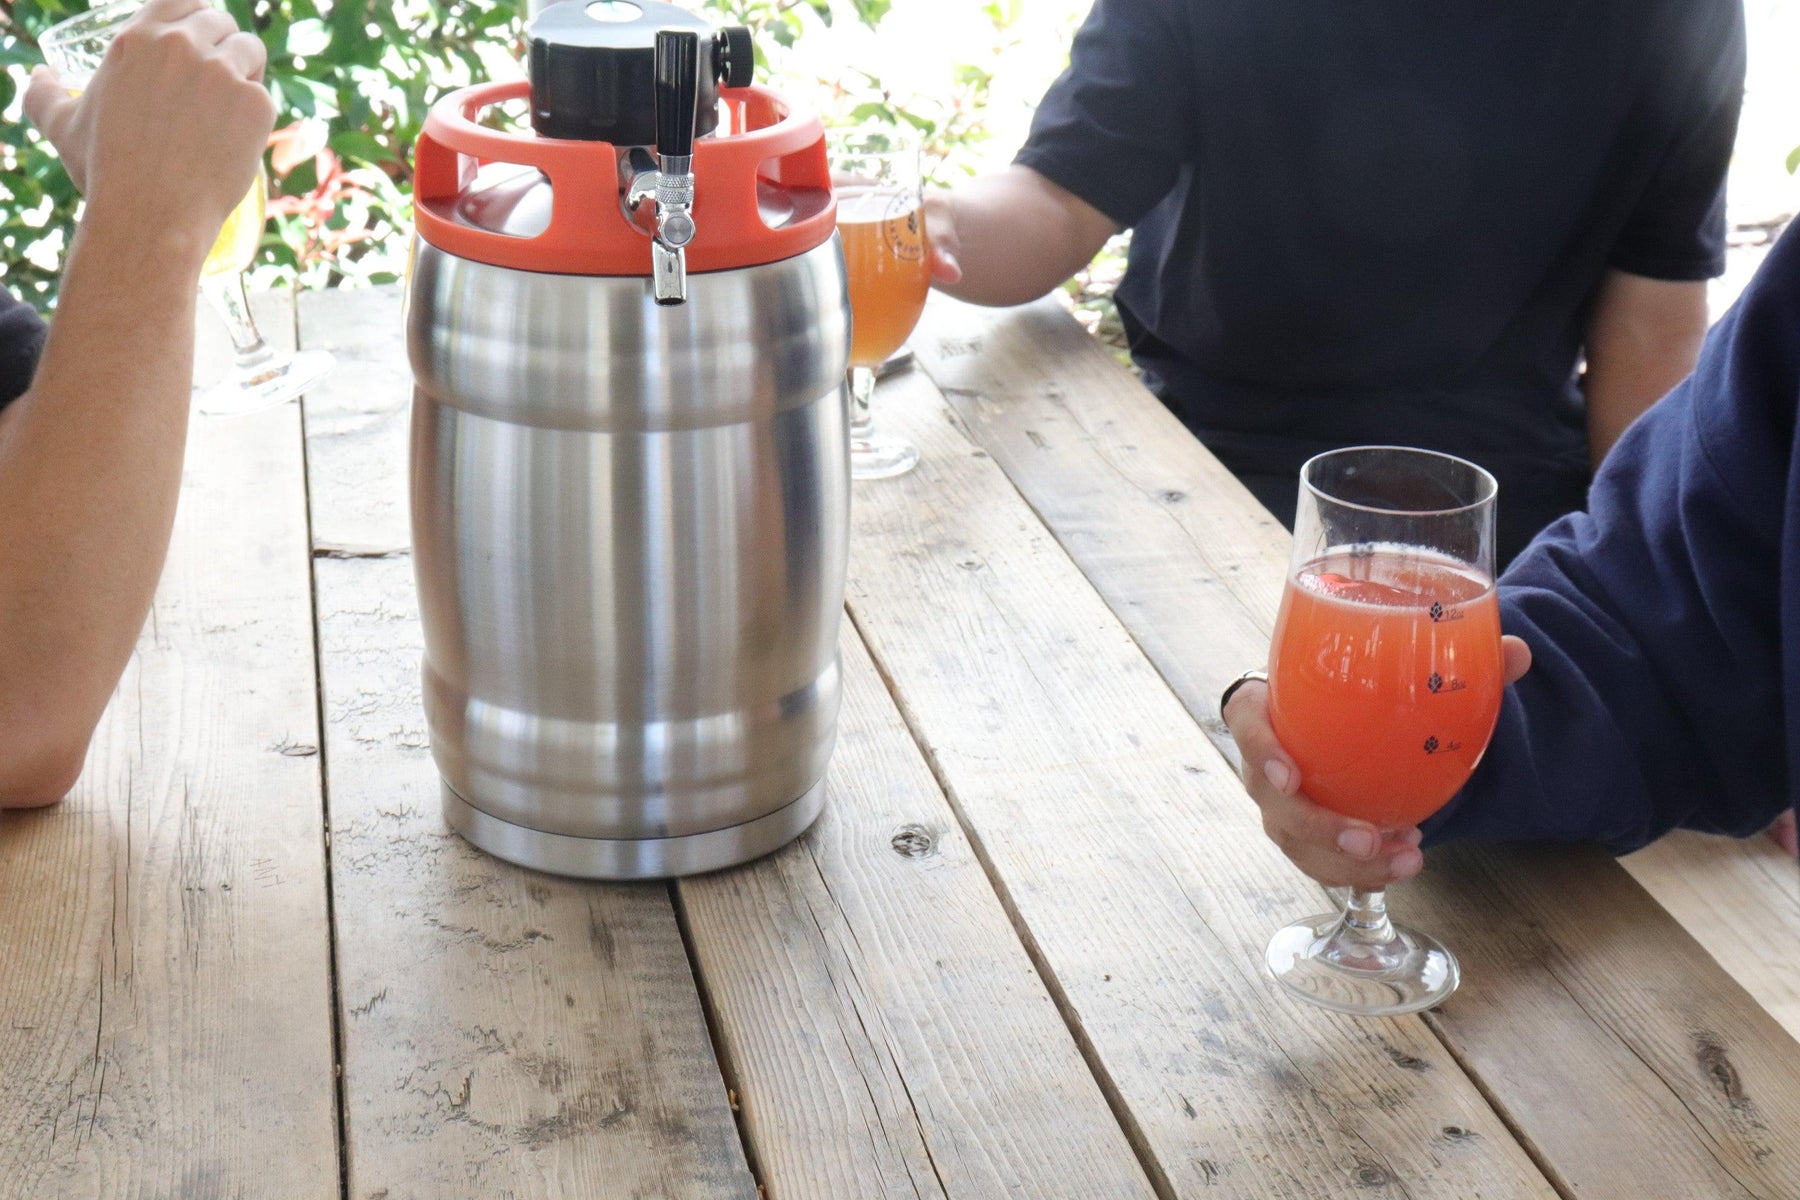 Portable Draft Beer Taste On-The-GO! - DIY Tools by GreatCircleUS